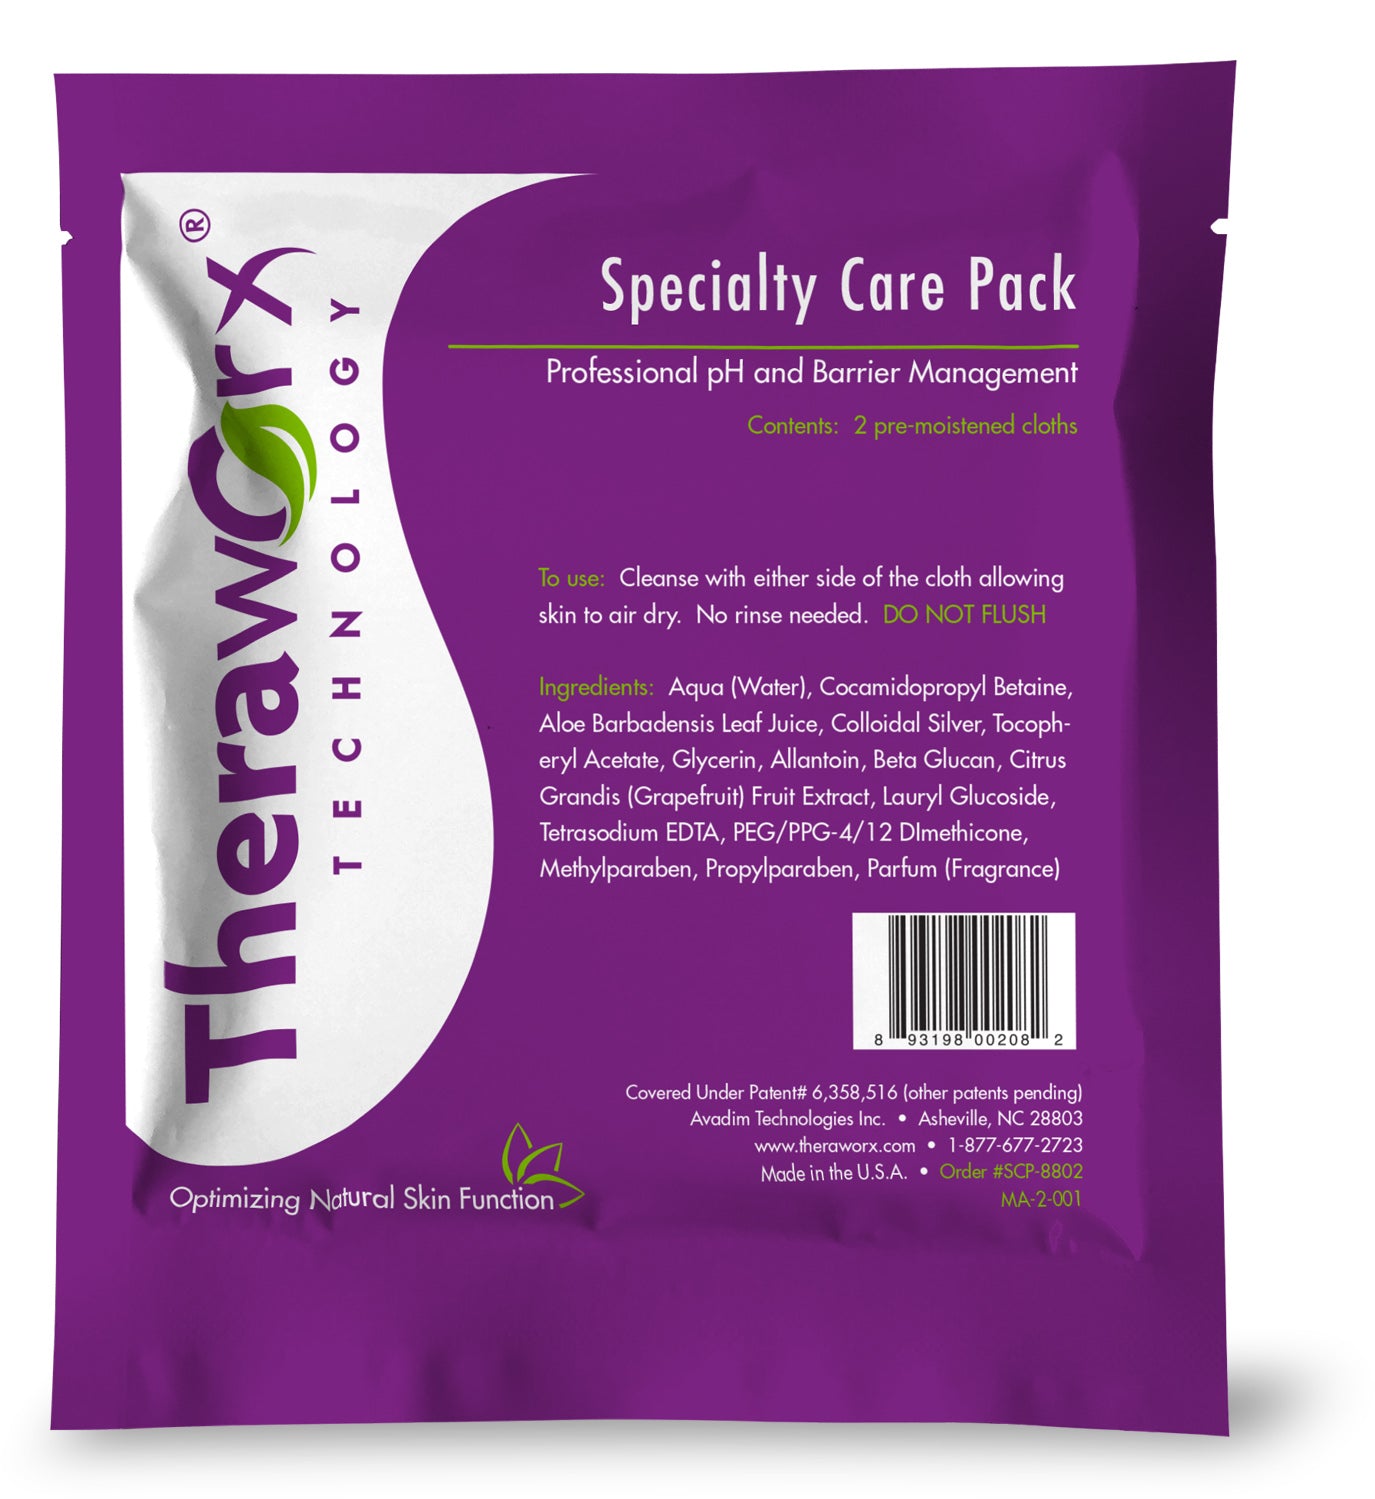 Theraworx Specialty Care Cloths AM-82-SCP-8802